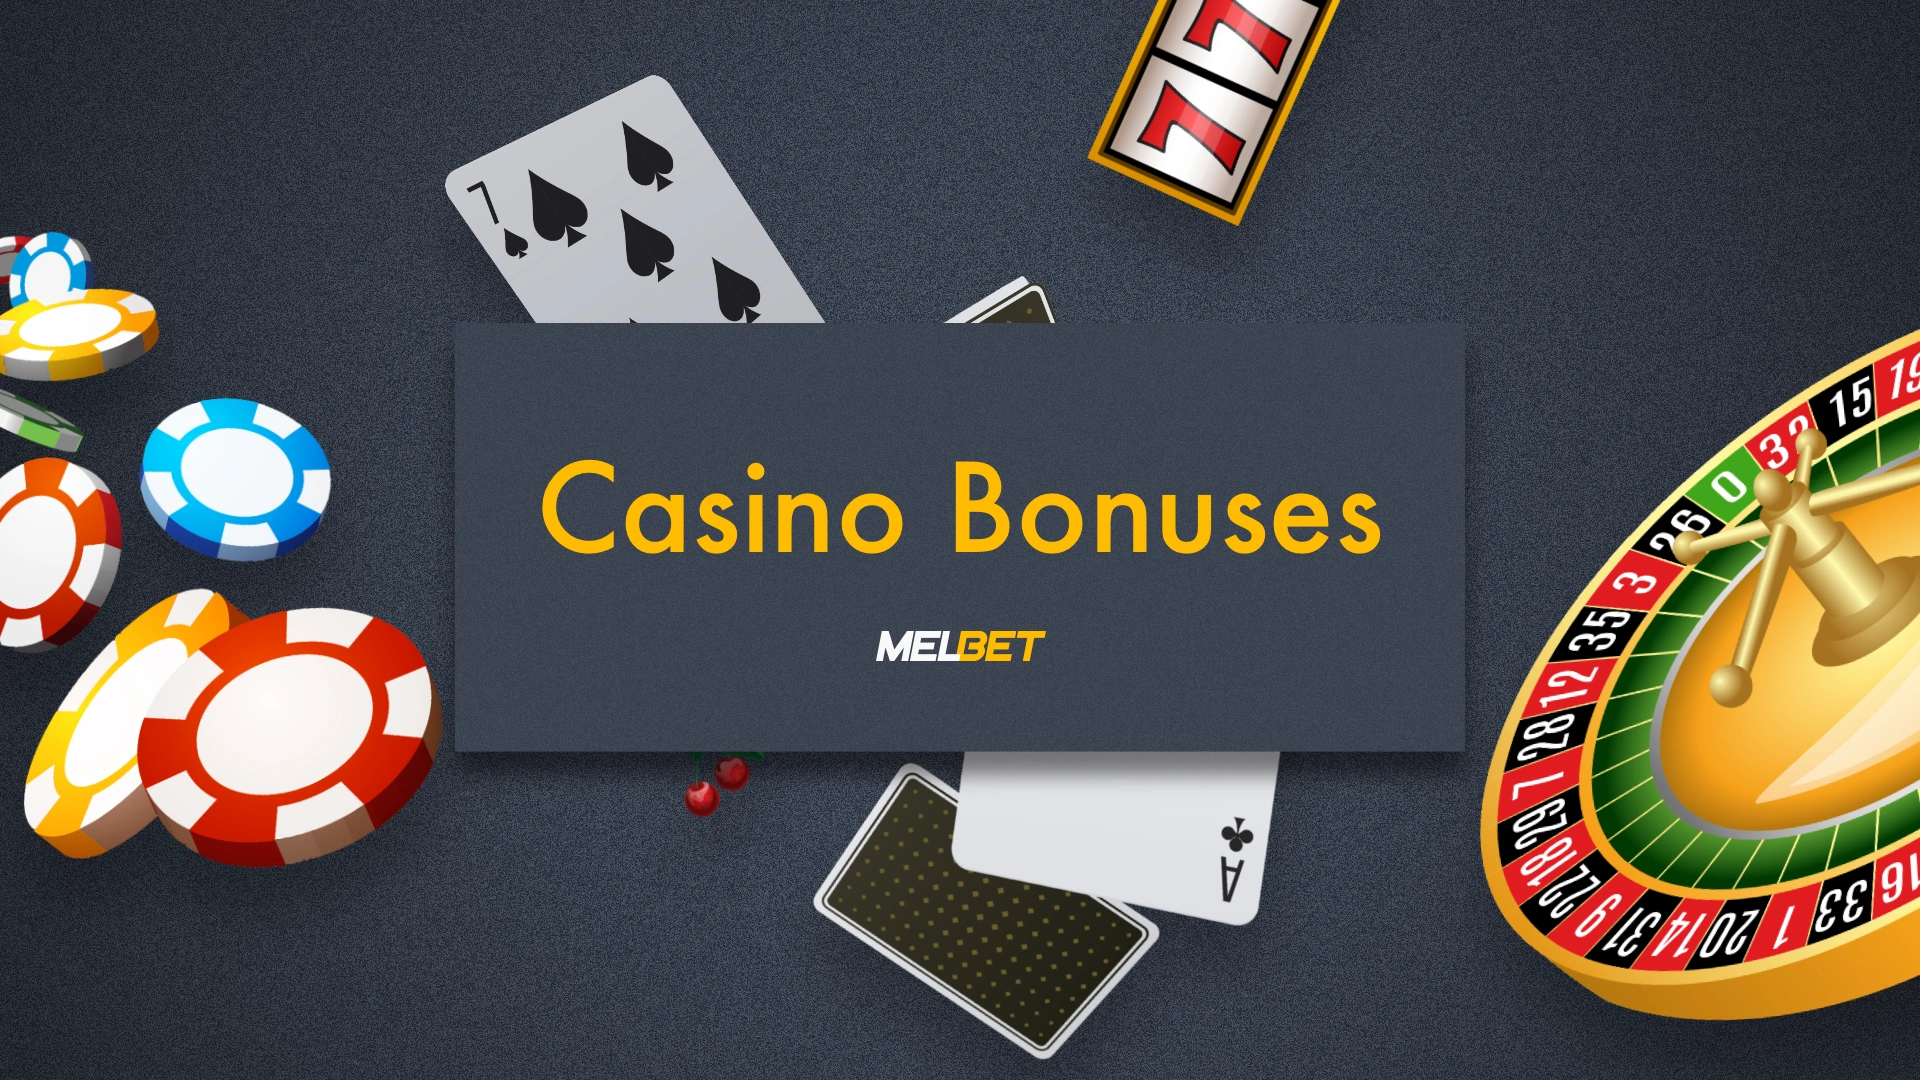 Bonuses and promotions for playing at Melbet Casino